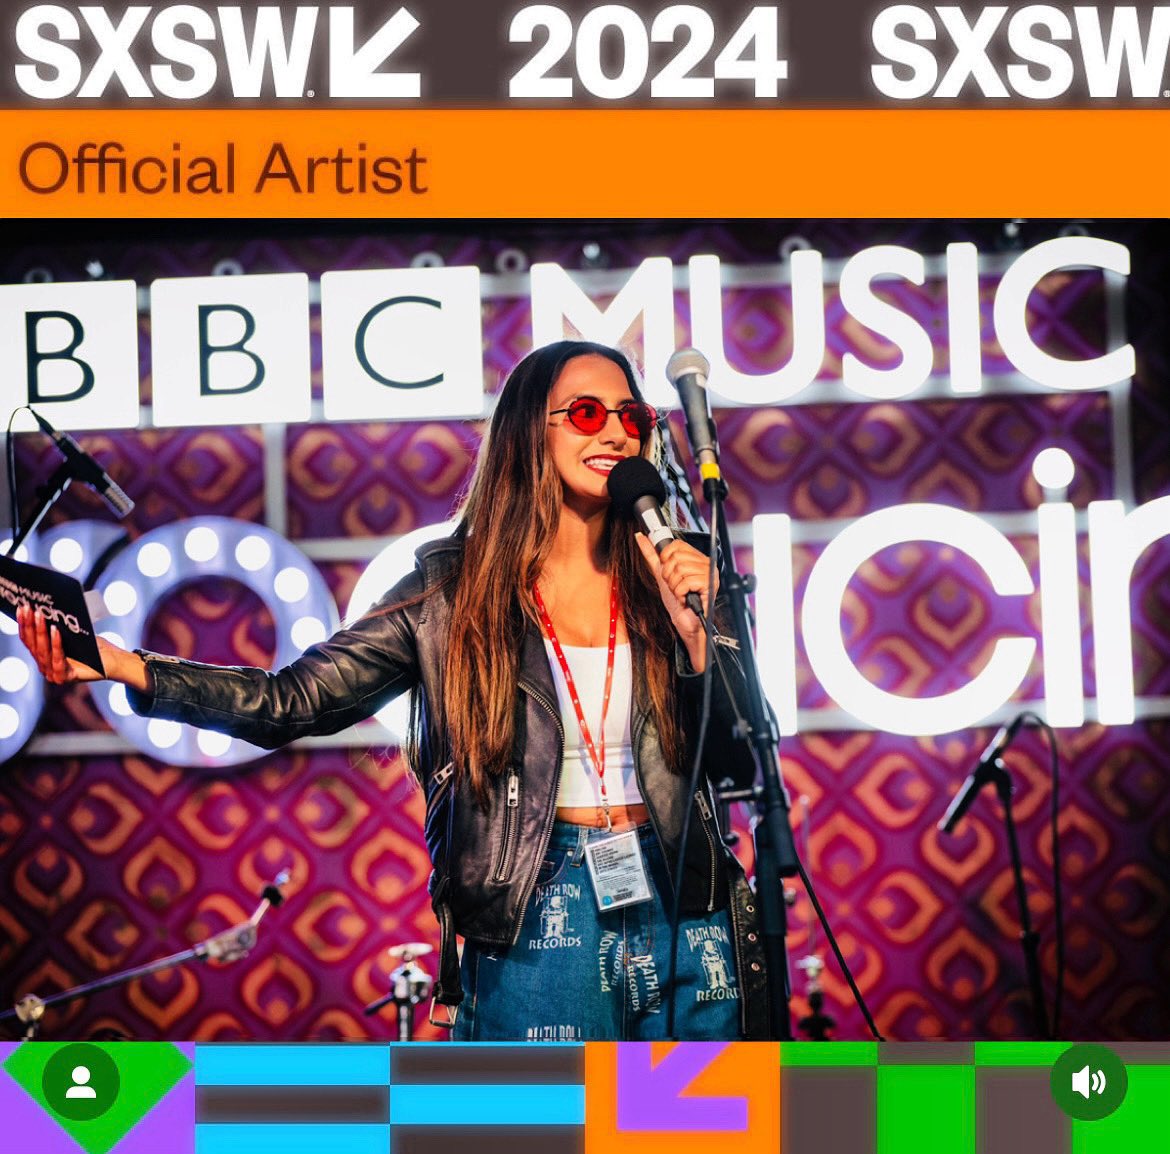 Gassed to announce I’ll be hosting across 3 stages for the BBC and the British Music Embassy at @sxsw 📣🇺🇸 The biggest new music festival in the states! Let’s go Texas!